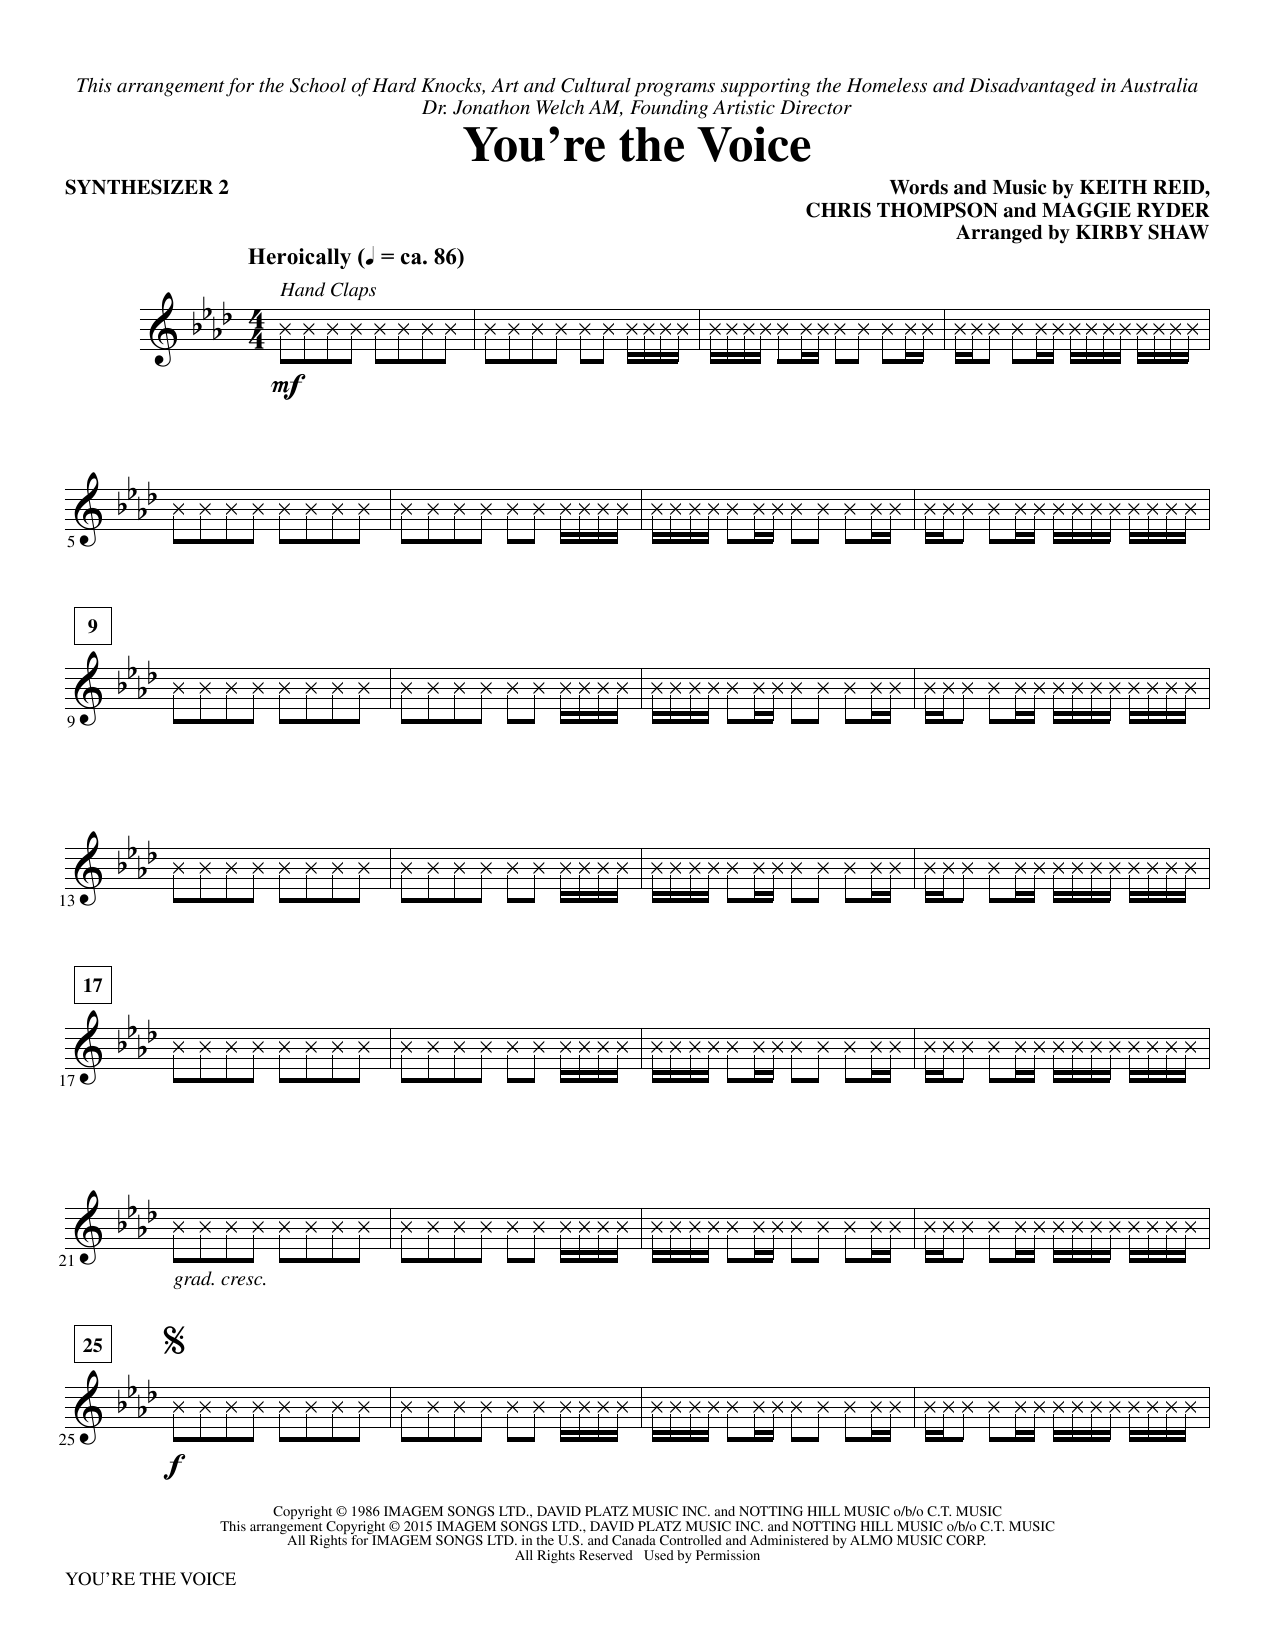 John Farnham You're the Voice (arr. Kirby Shaw) - Synthesizer II sheet music notes and chords. Download Printable PDF.